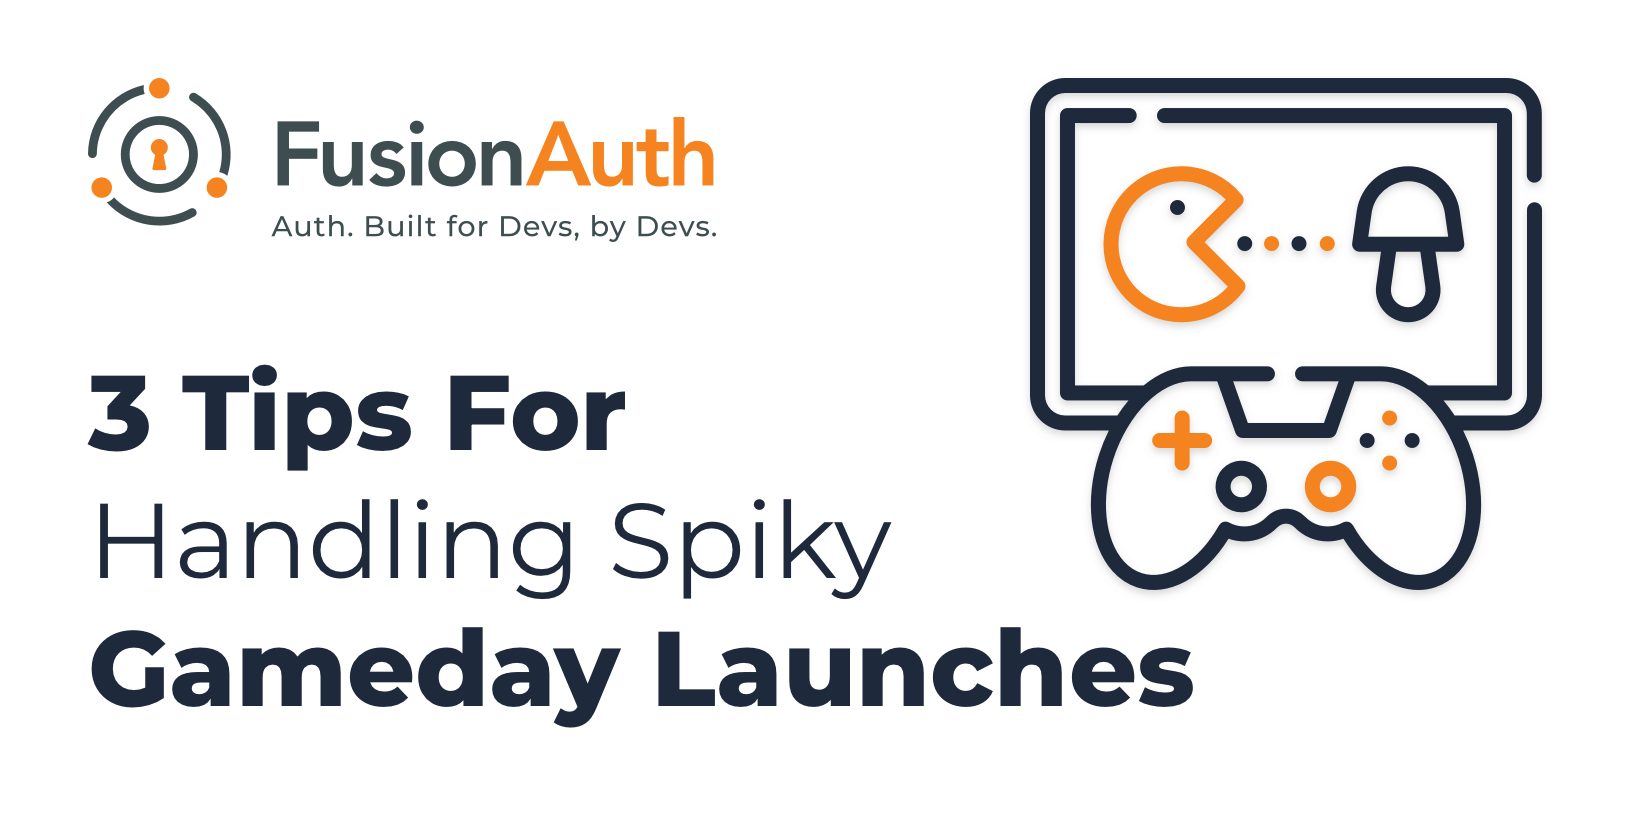 Three tips for handling spiky gameday launches